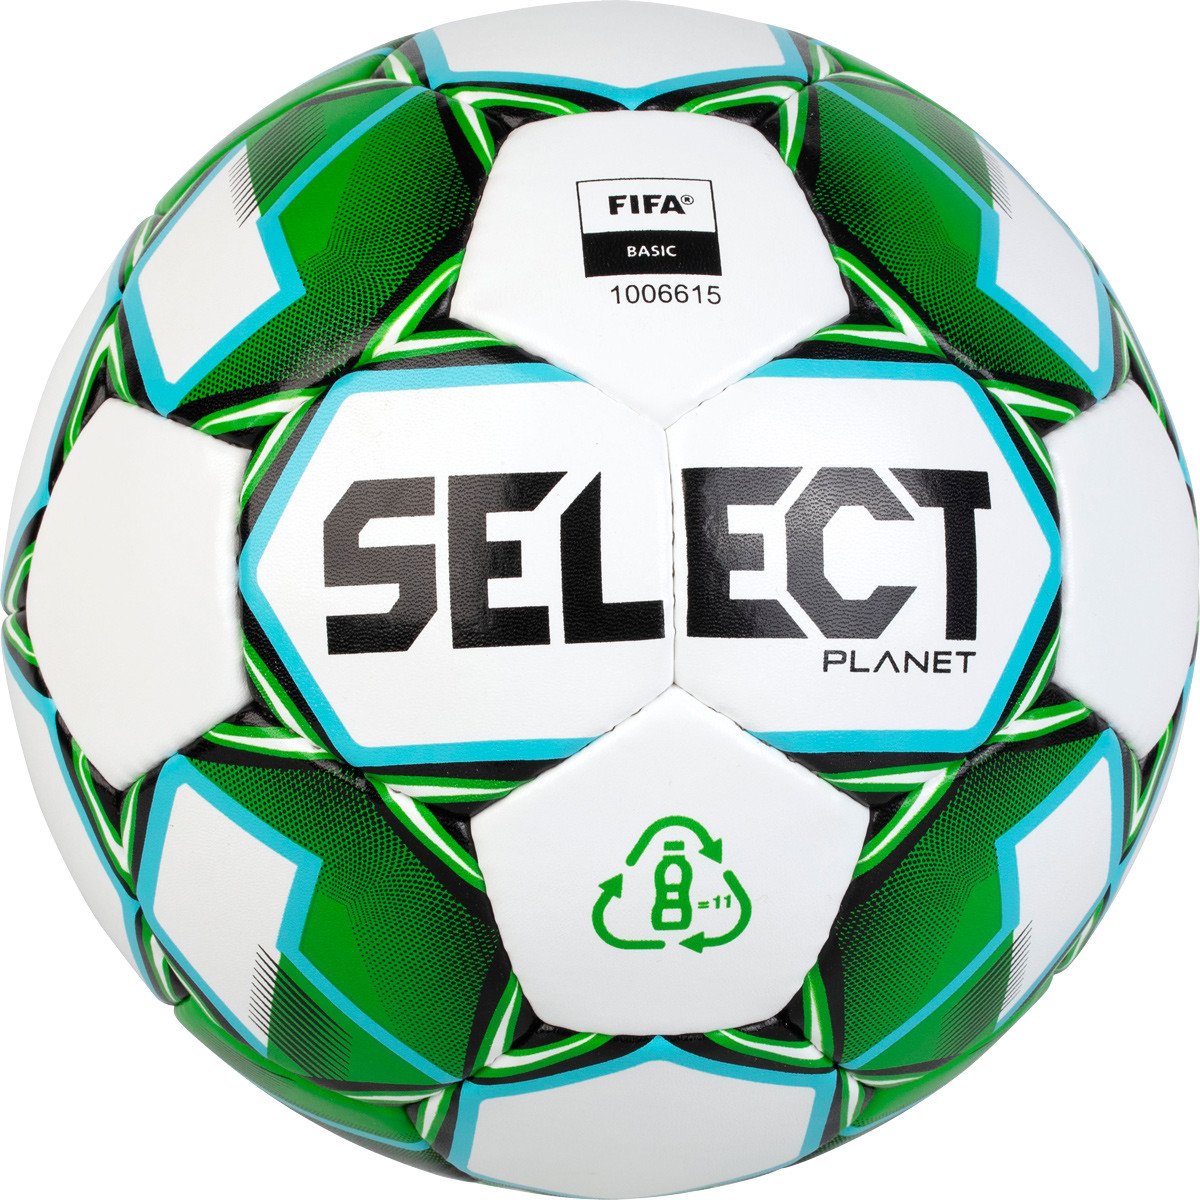 Select Planet Fodbold